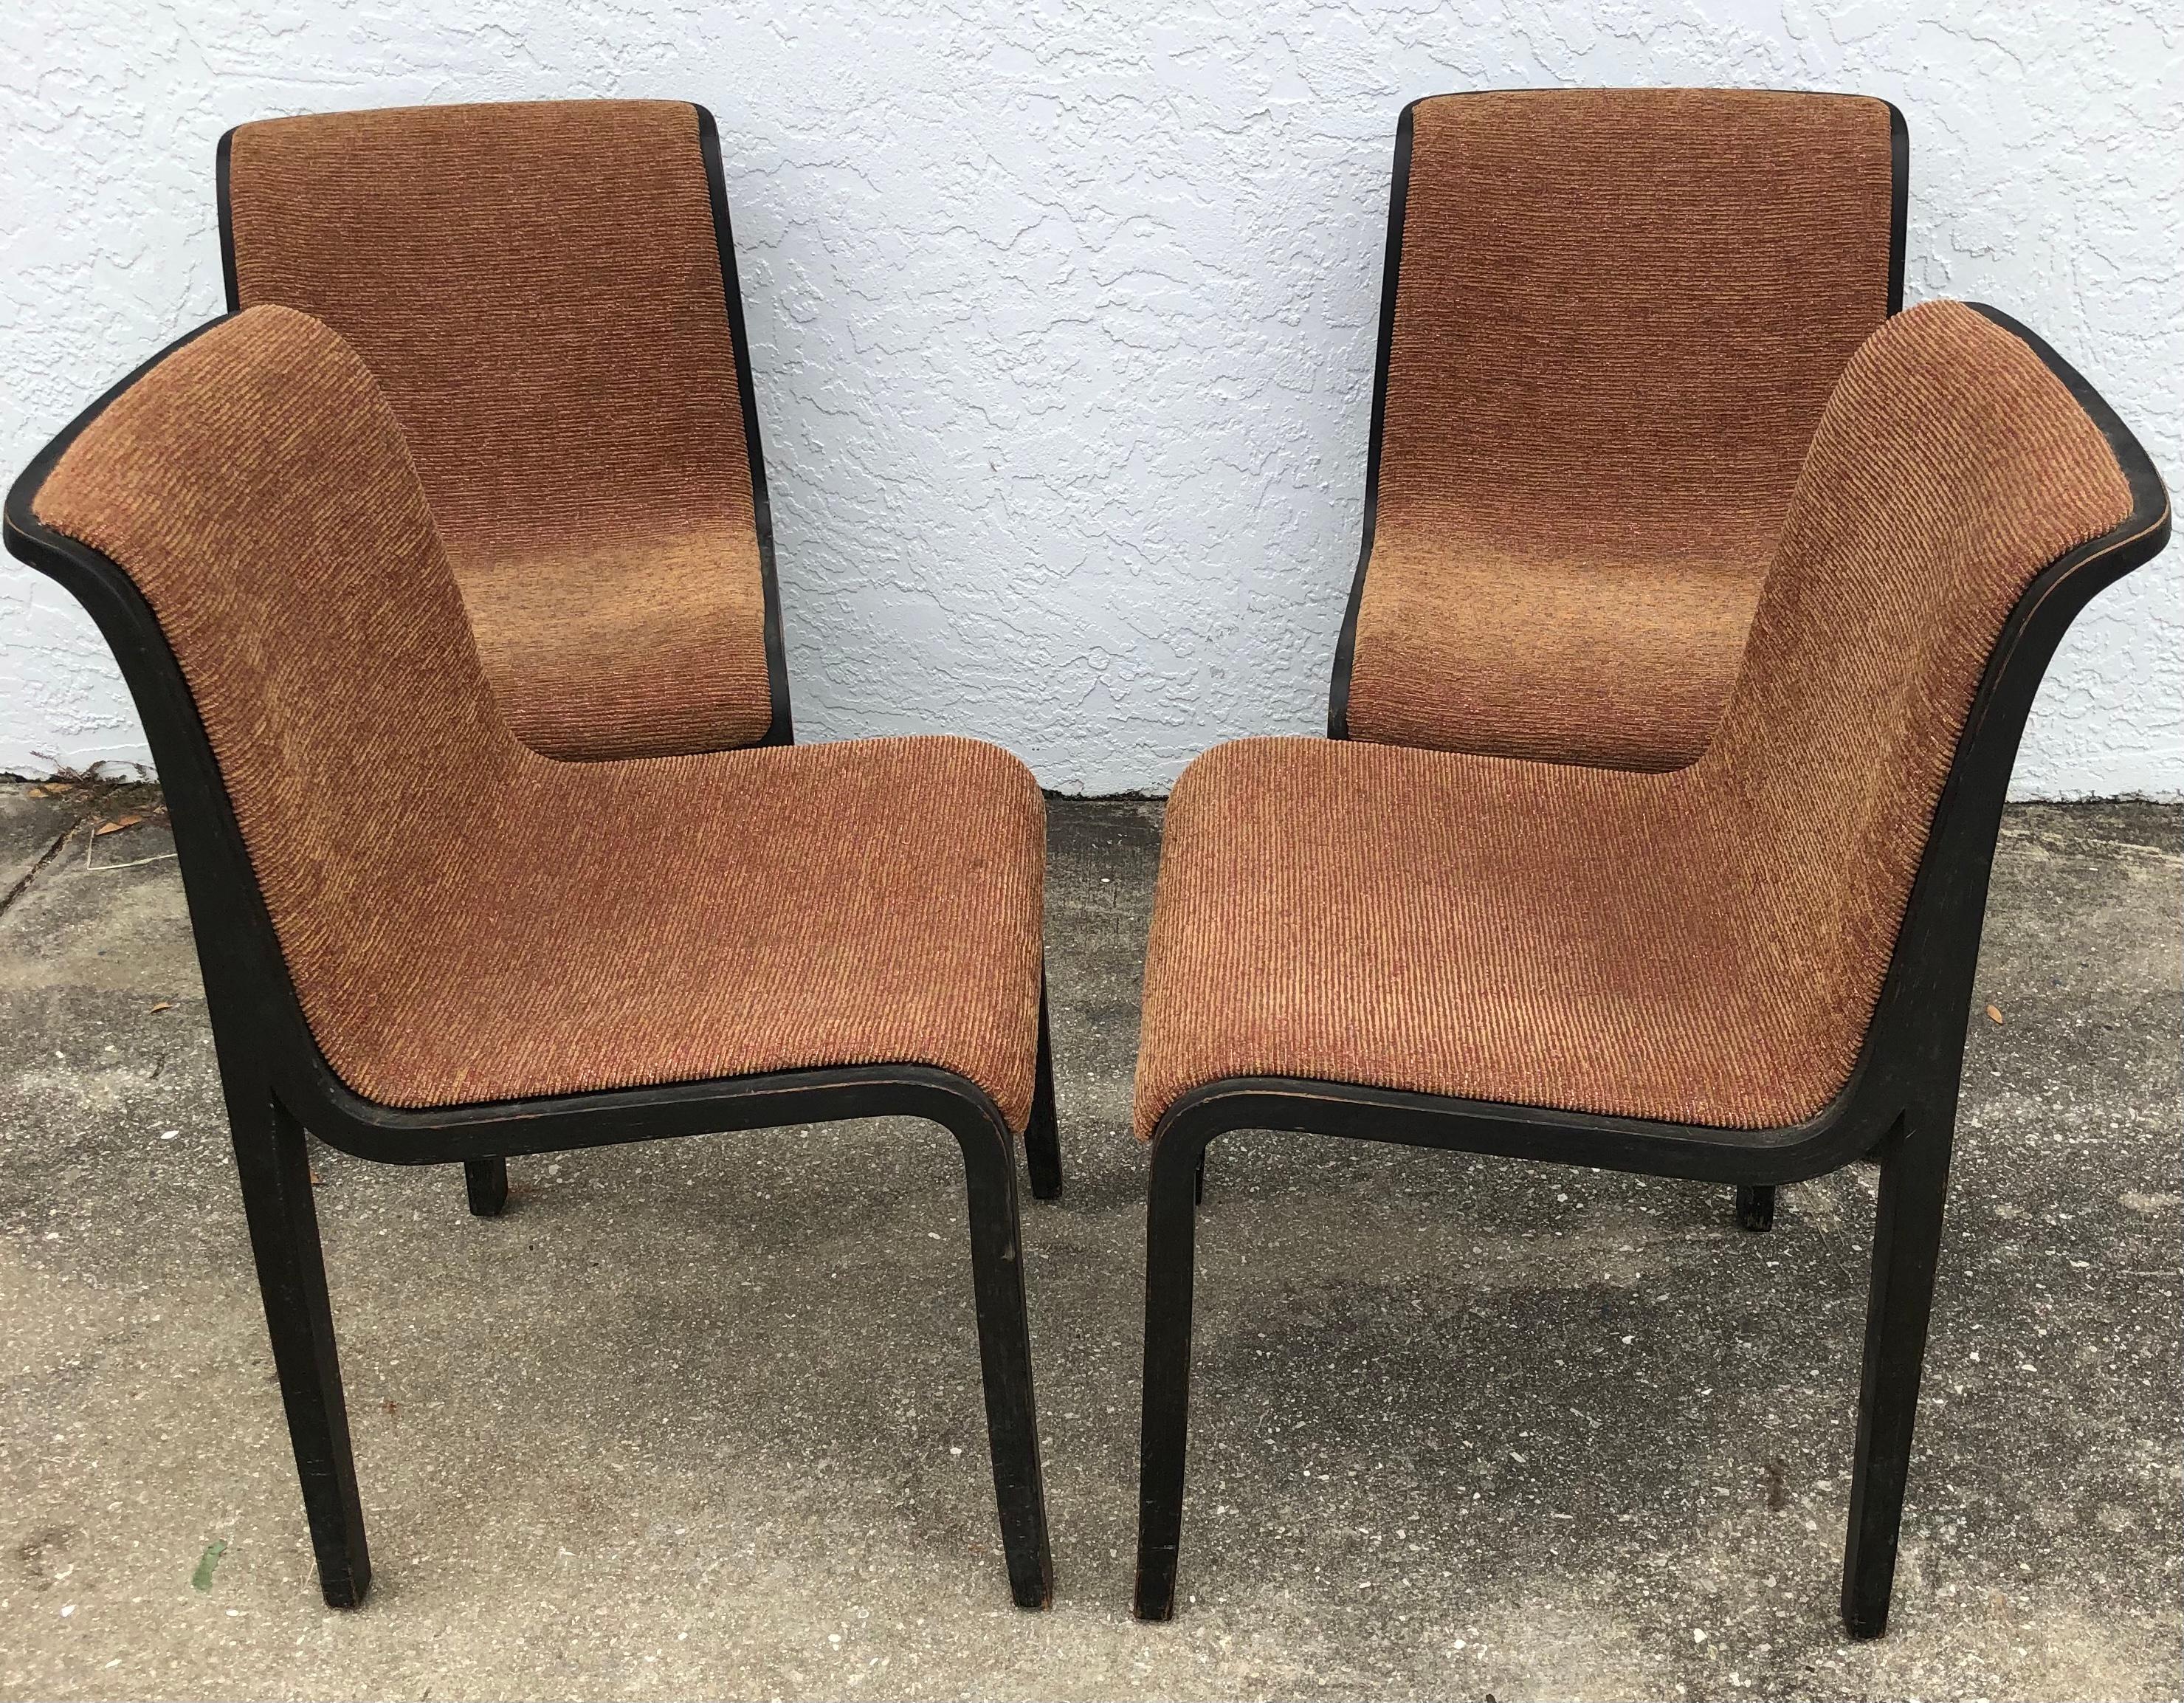 Set of 4 Mid-Century Modern Bill Stephens Knoll black walnut side chairs

Wonderful set of 4 vintage Mid-Century Modern Bill Stephens Knoll black walnut side chairs designed by Bill Stevens for Knoll. They are of bentwood appear to retain the